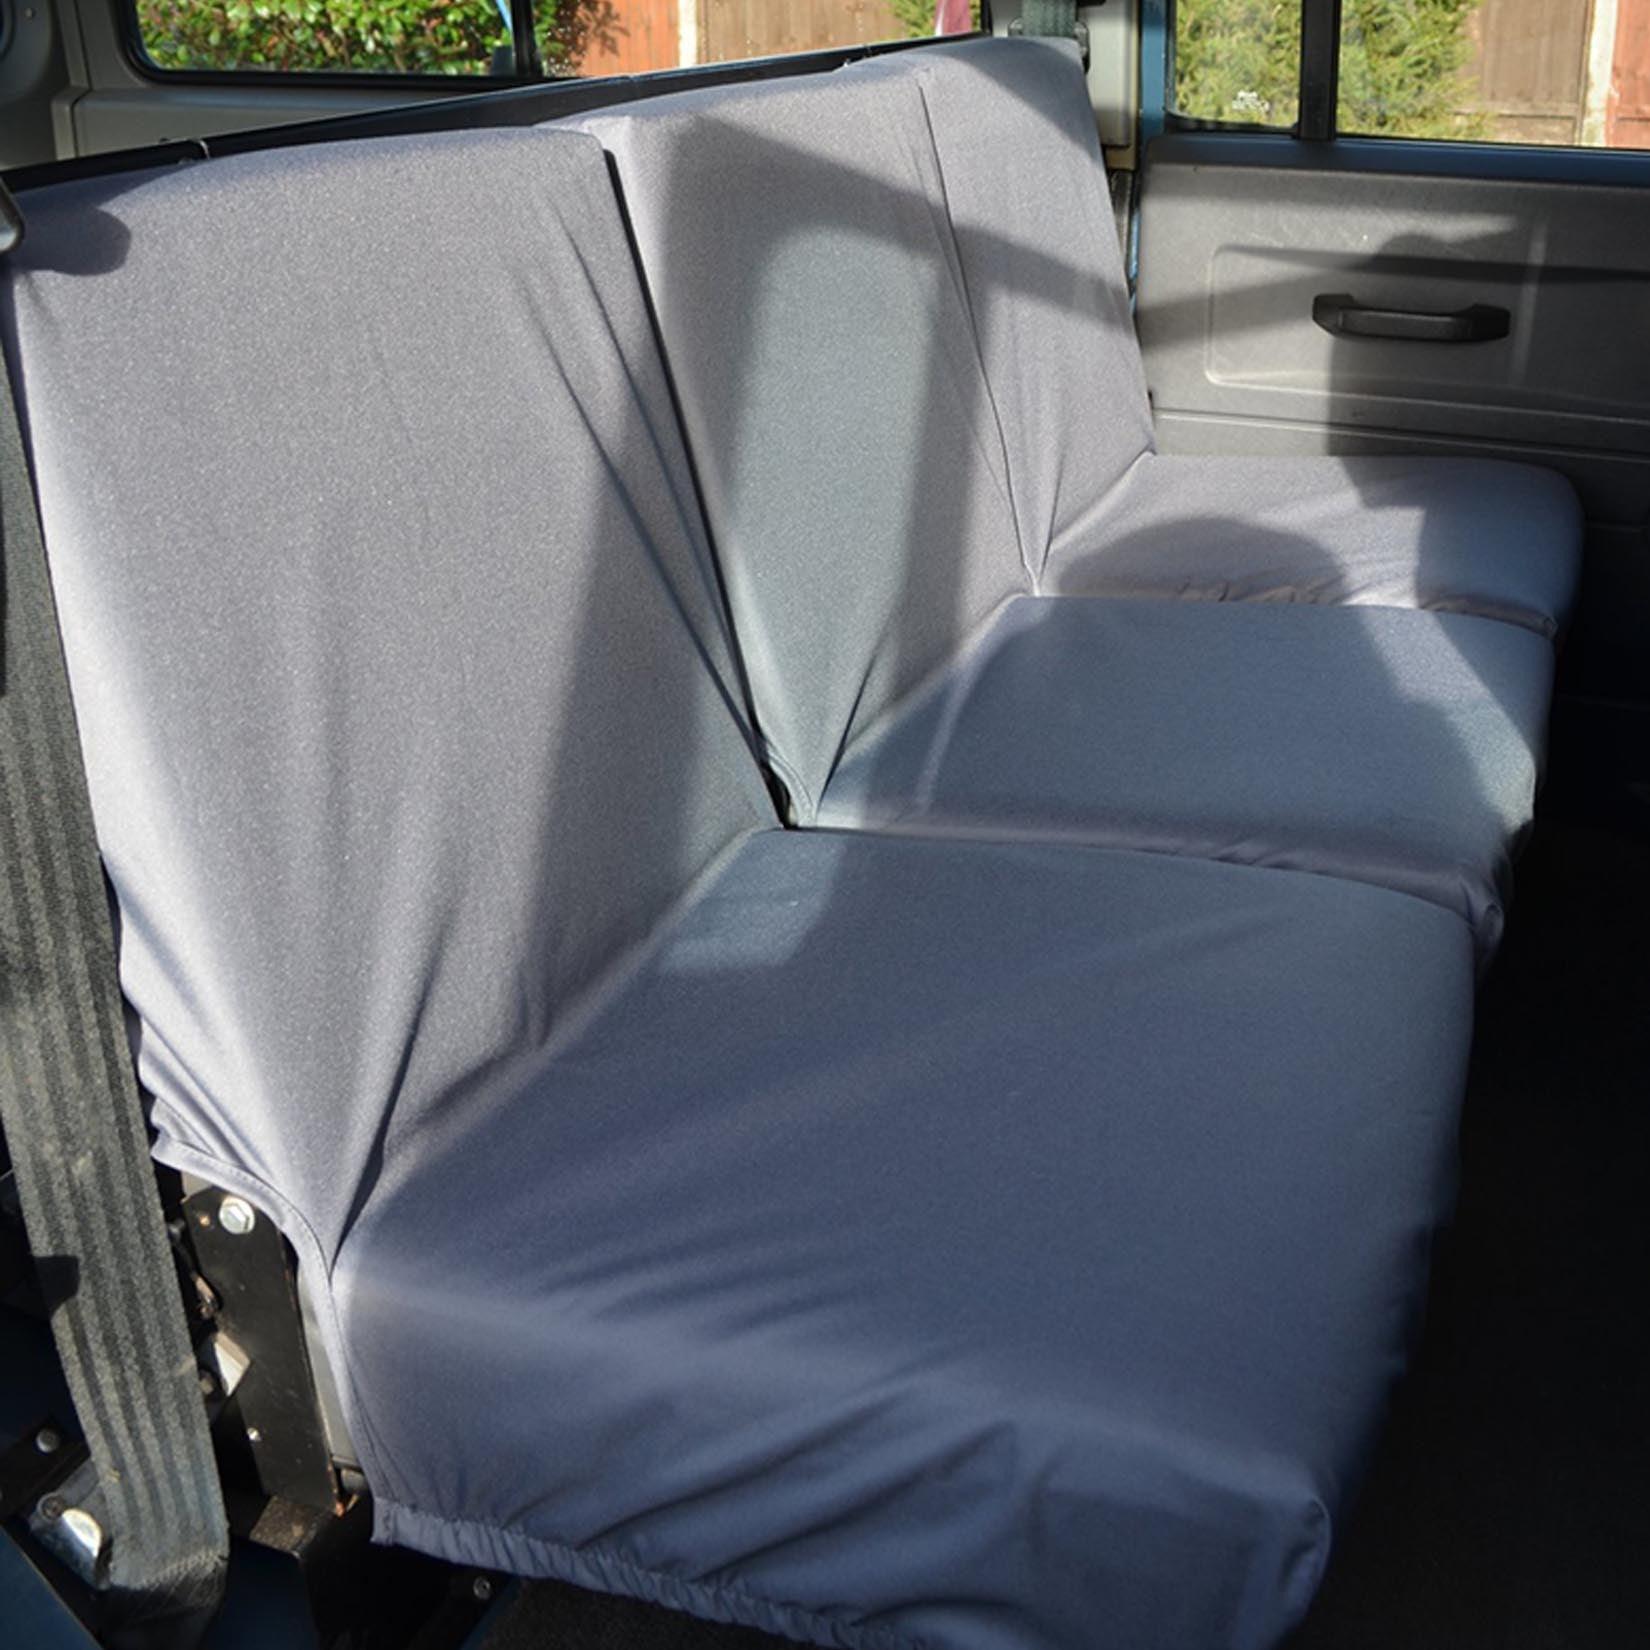 LAND ROVER DEFENDER 90 110 - 1983-2007 REAR SINGLE SEAT COVERS – GREY - Storm Xccessories2